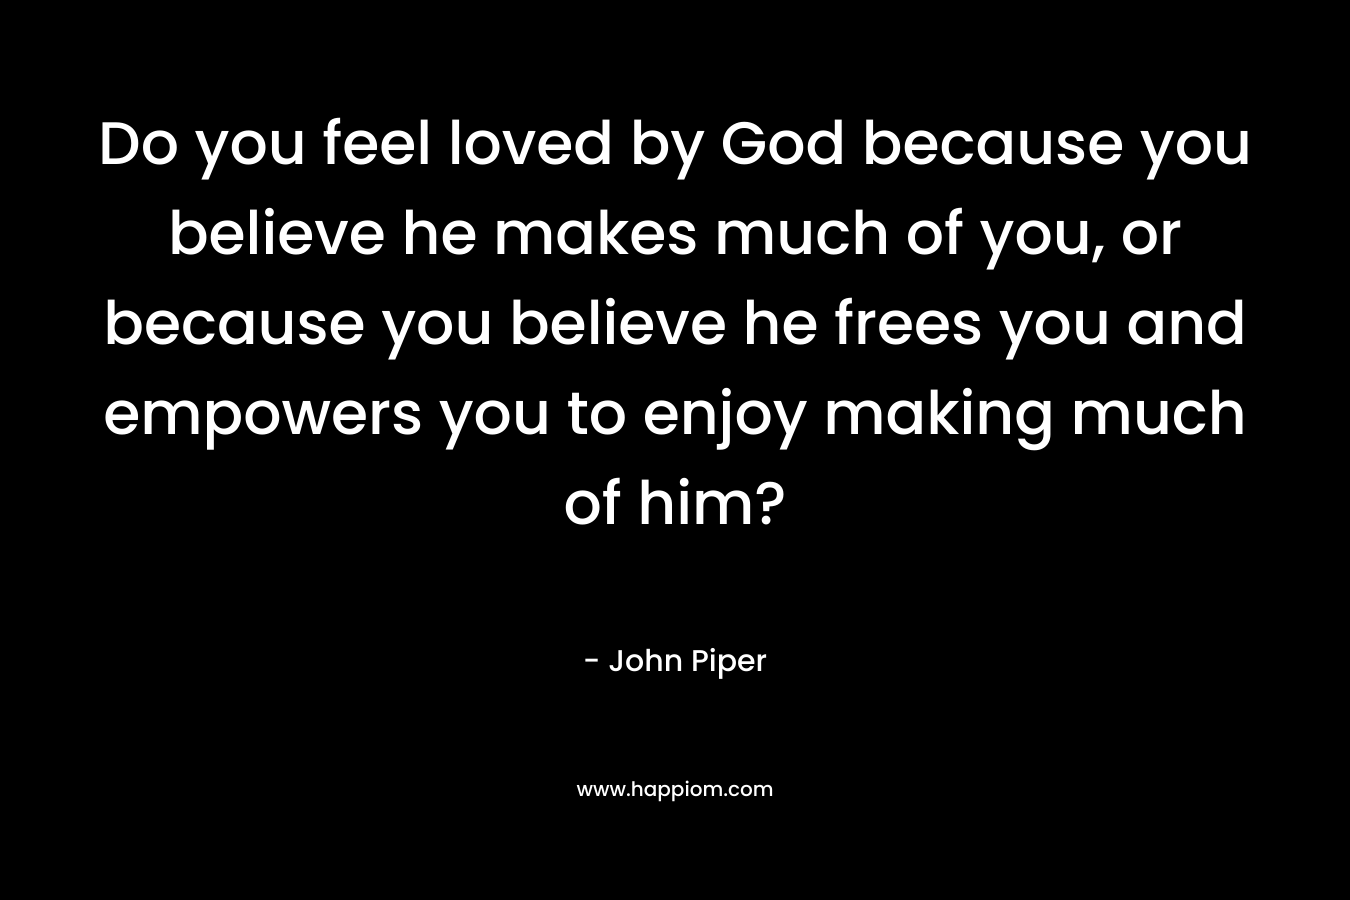 Do you feel loved by God because you believe he makes much of you, or because you believe he frees you and empowers you to enjoy making much of him? – John Piper